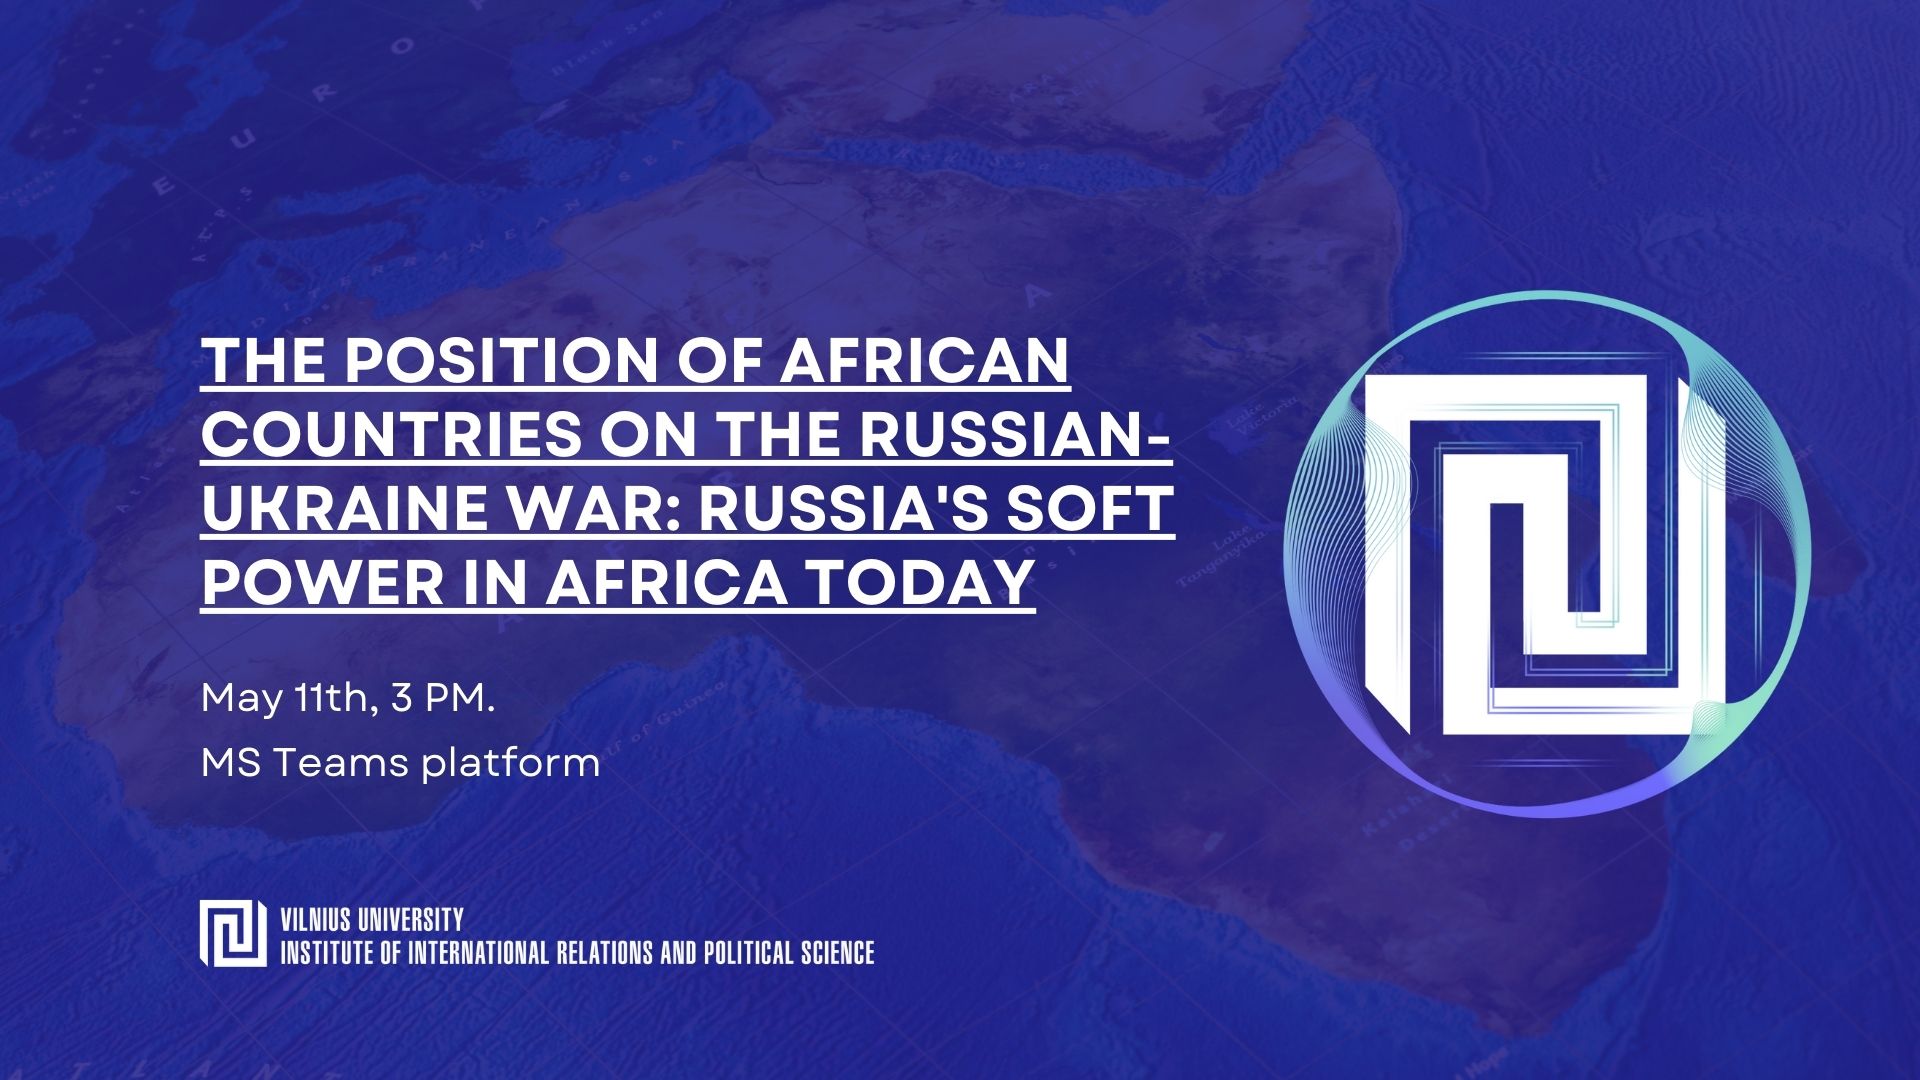 The Position of African Countries on the Russian-Ukraine War: Russia’s soft power in Africa Today